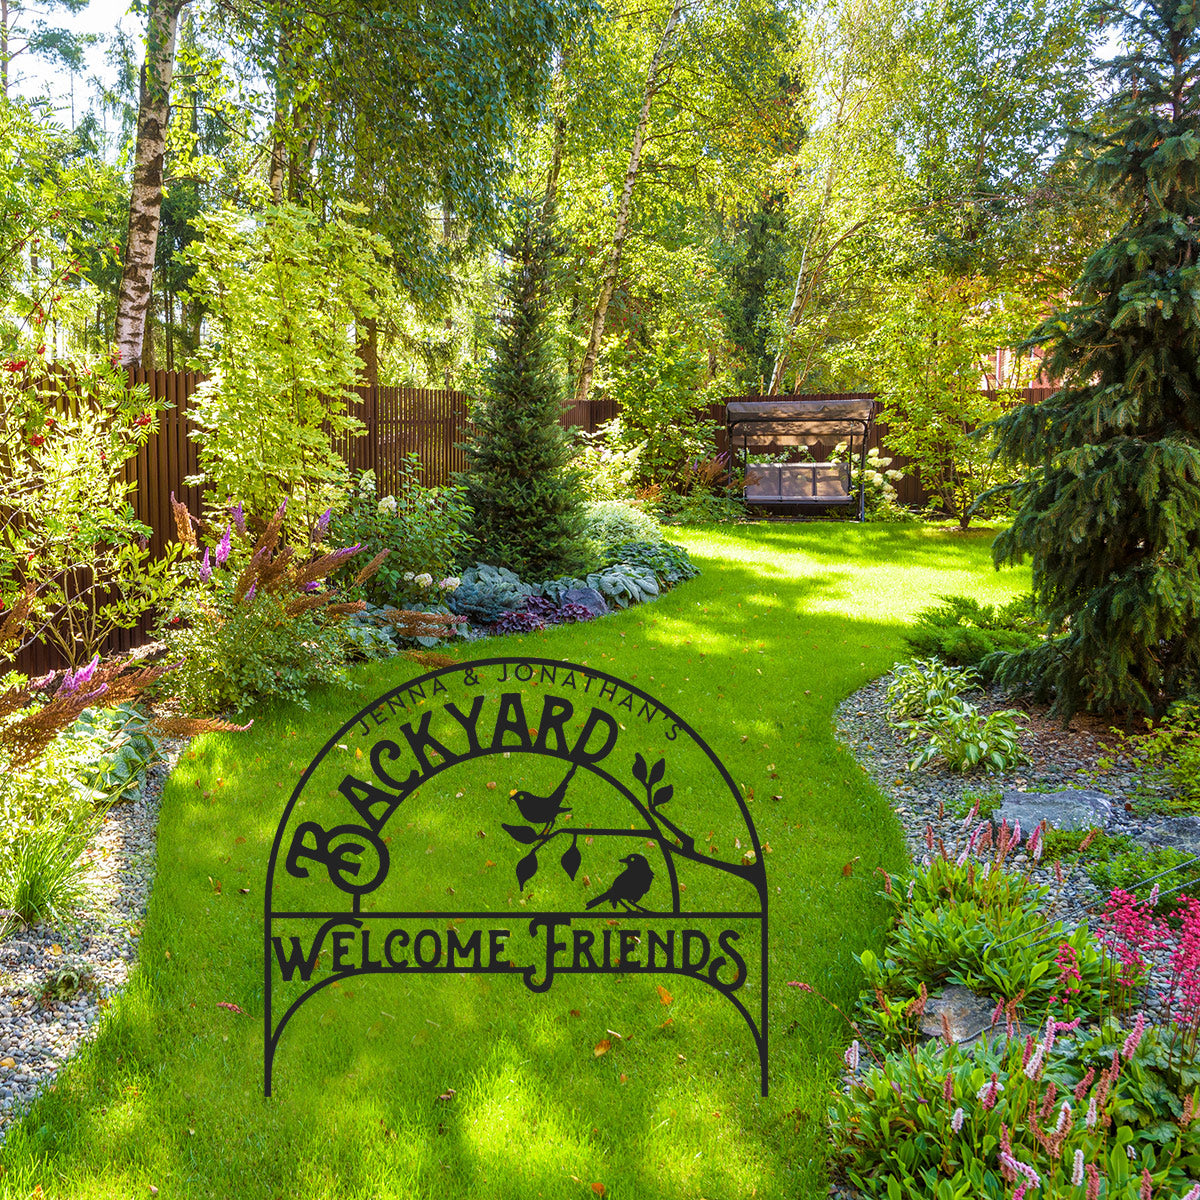 Backyard Welcome Friends metal sign staked into a manicured lawn Black